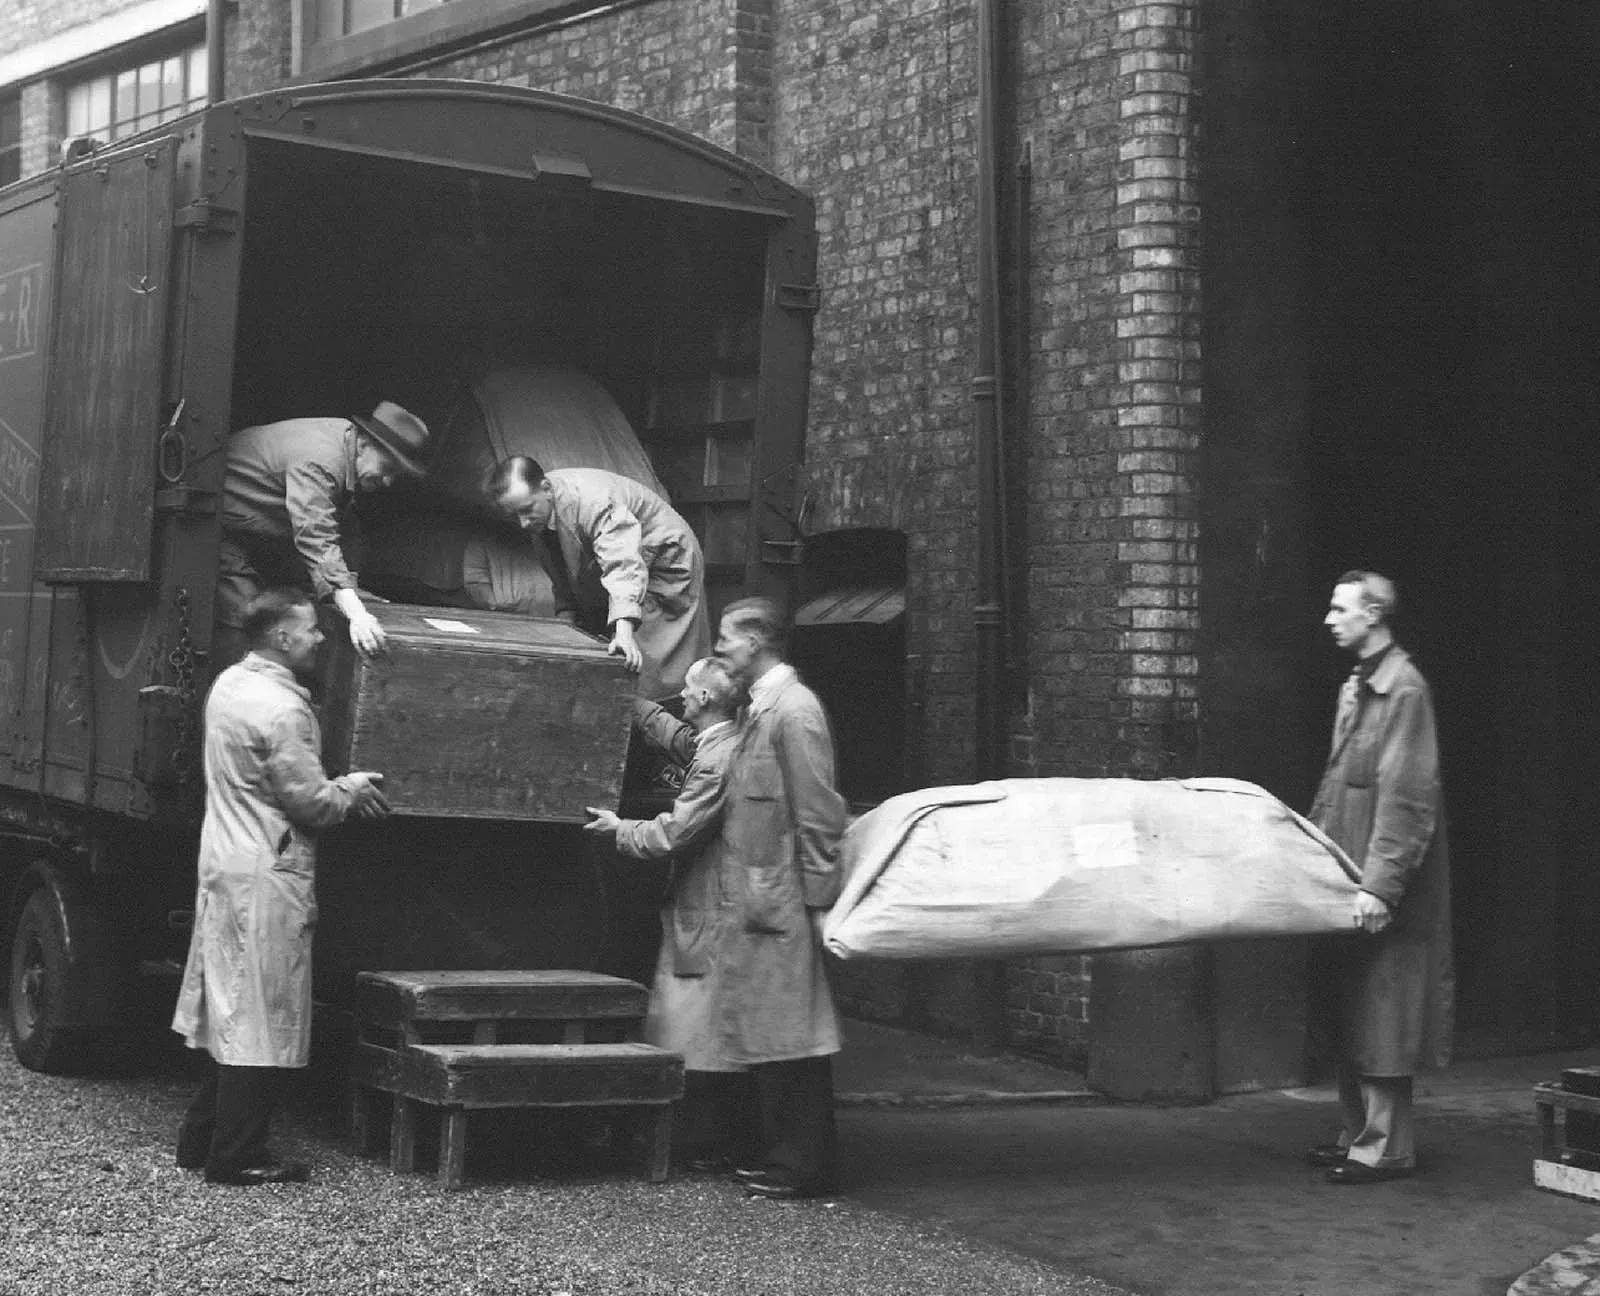 Figure 4 - London and North Eastern Railway container being loaded, The Victoria and Albert Museum, London, 1939. Museum reference #80565. Photographer: not recorded.